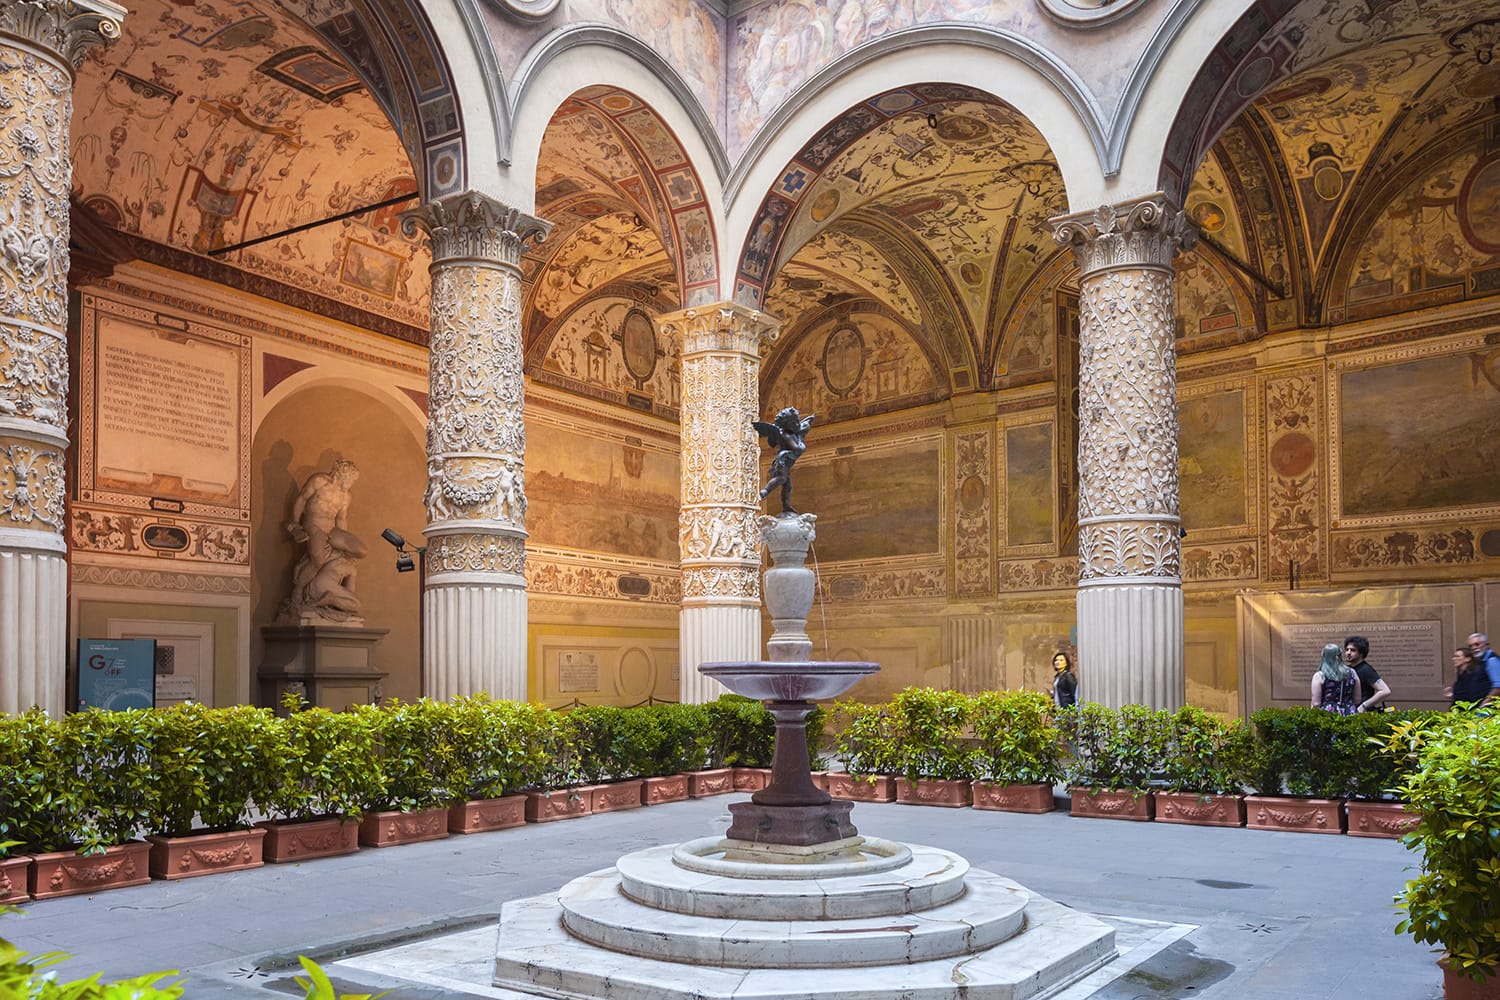 Inner courtyard of Palazzo Vecchio - town hall of Florence, Italy